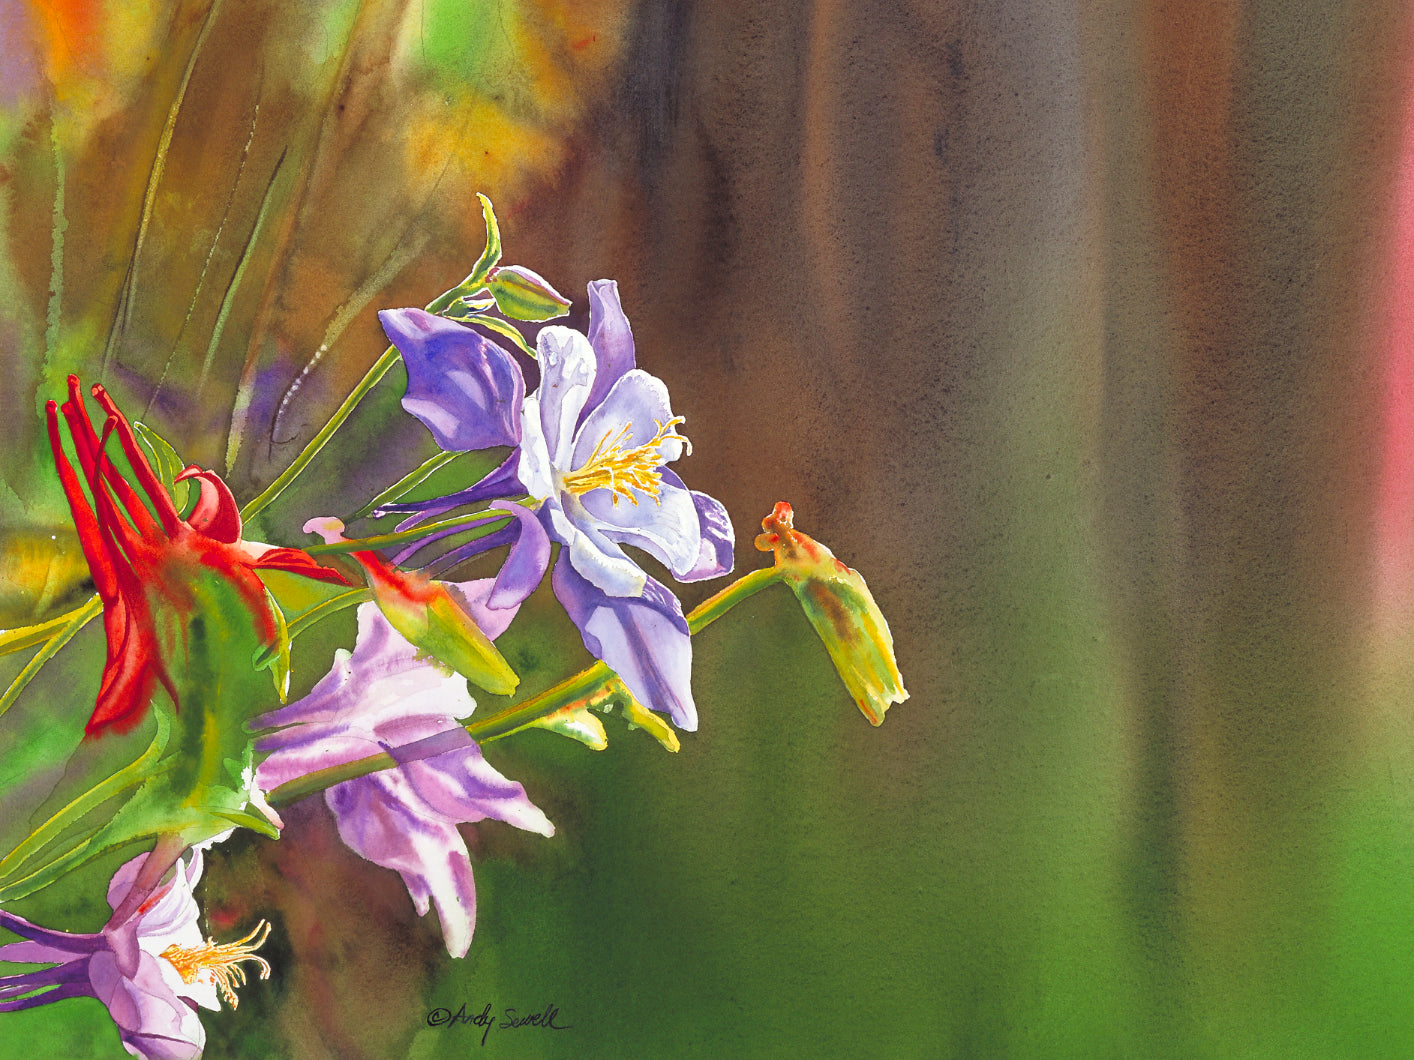 "Purple Colombine" 18x24 giclee print - a signed canvas or paper print from watercolor